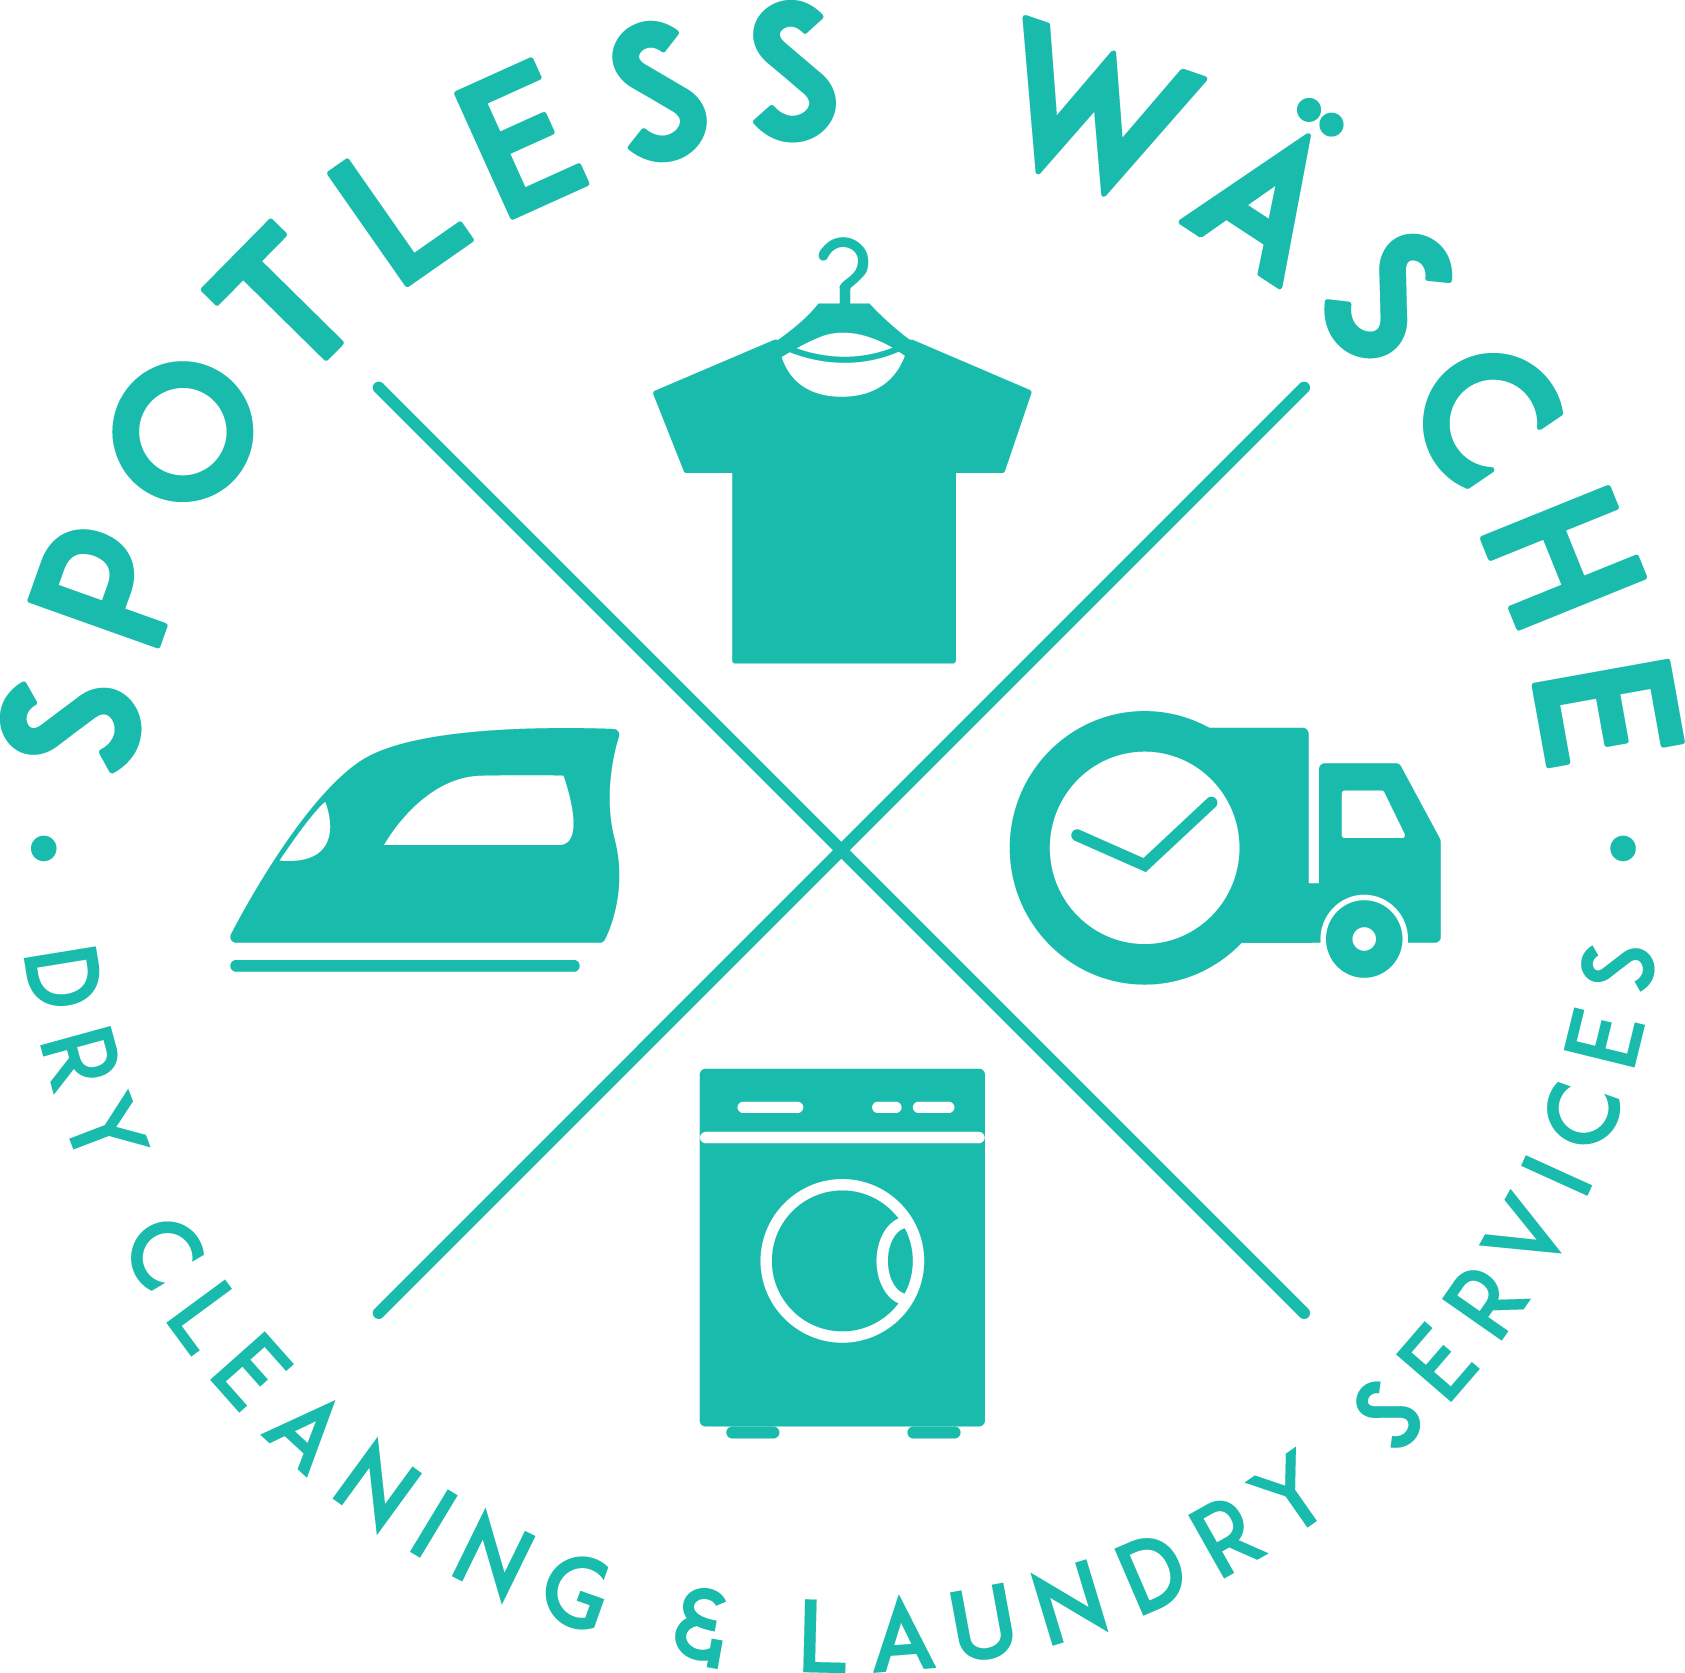 Spotless Wasche Logo - Pmc Care (1685x1673)